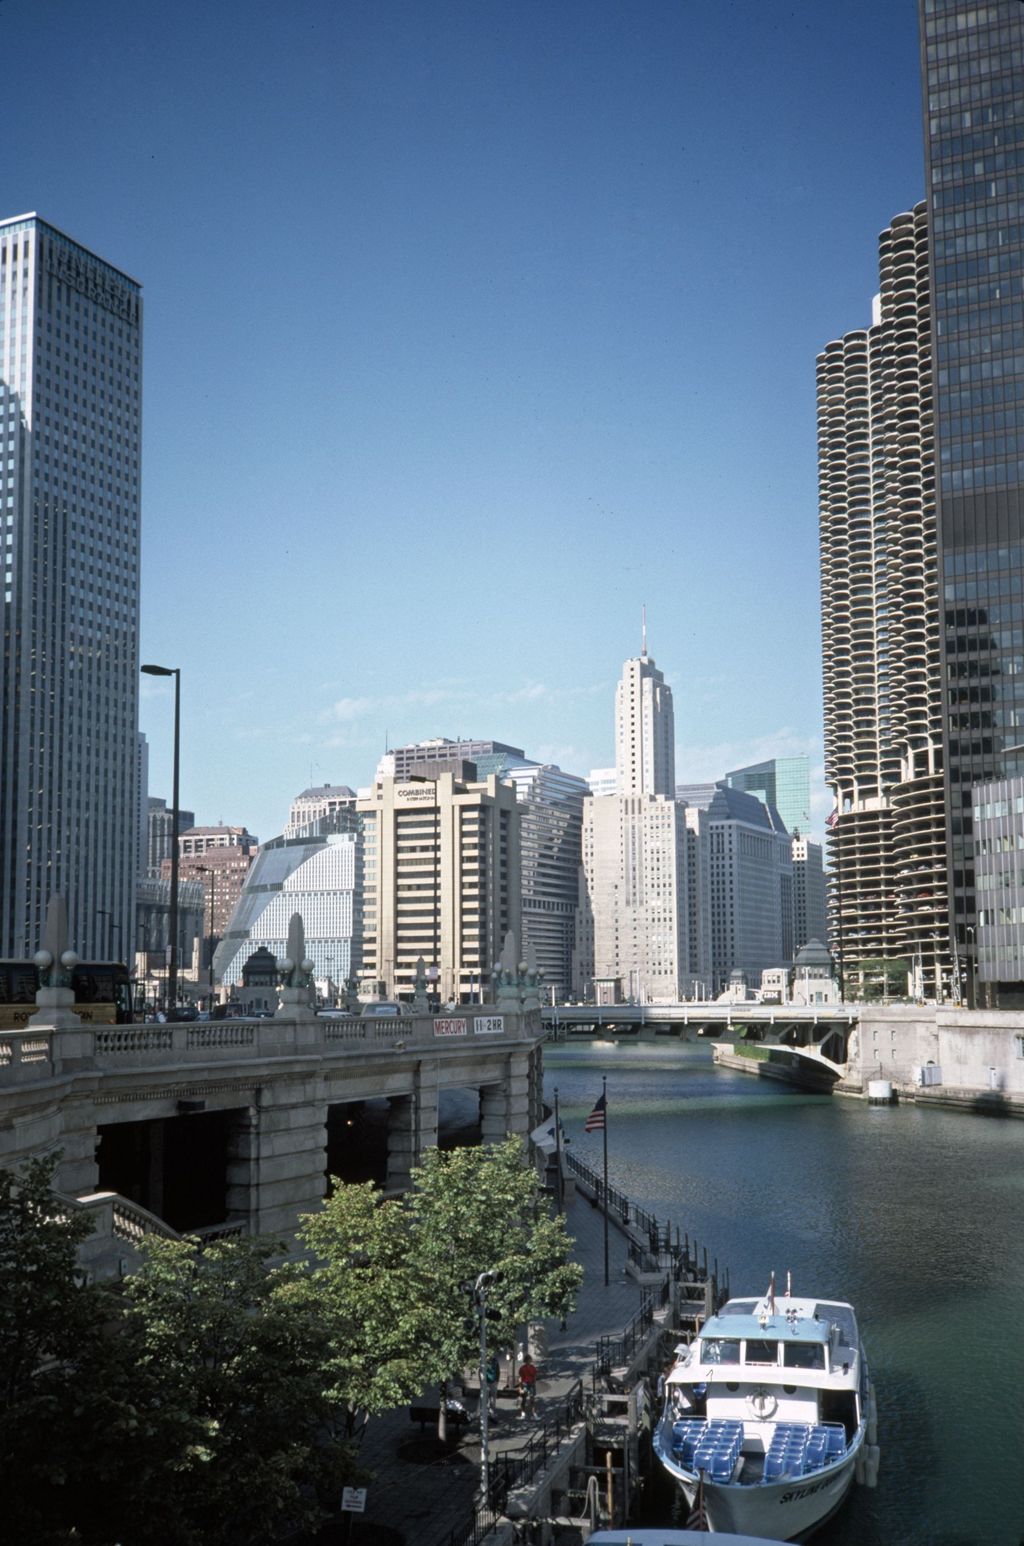 Miniature of Chicago Riverwalk and downtown high-rise buildings